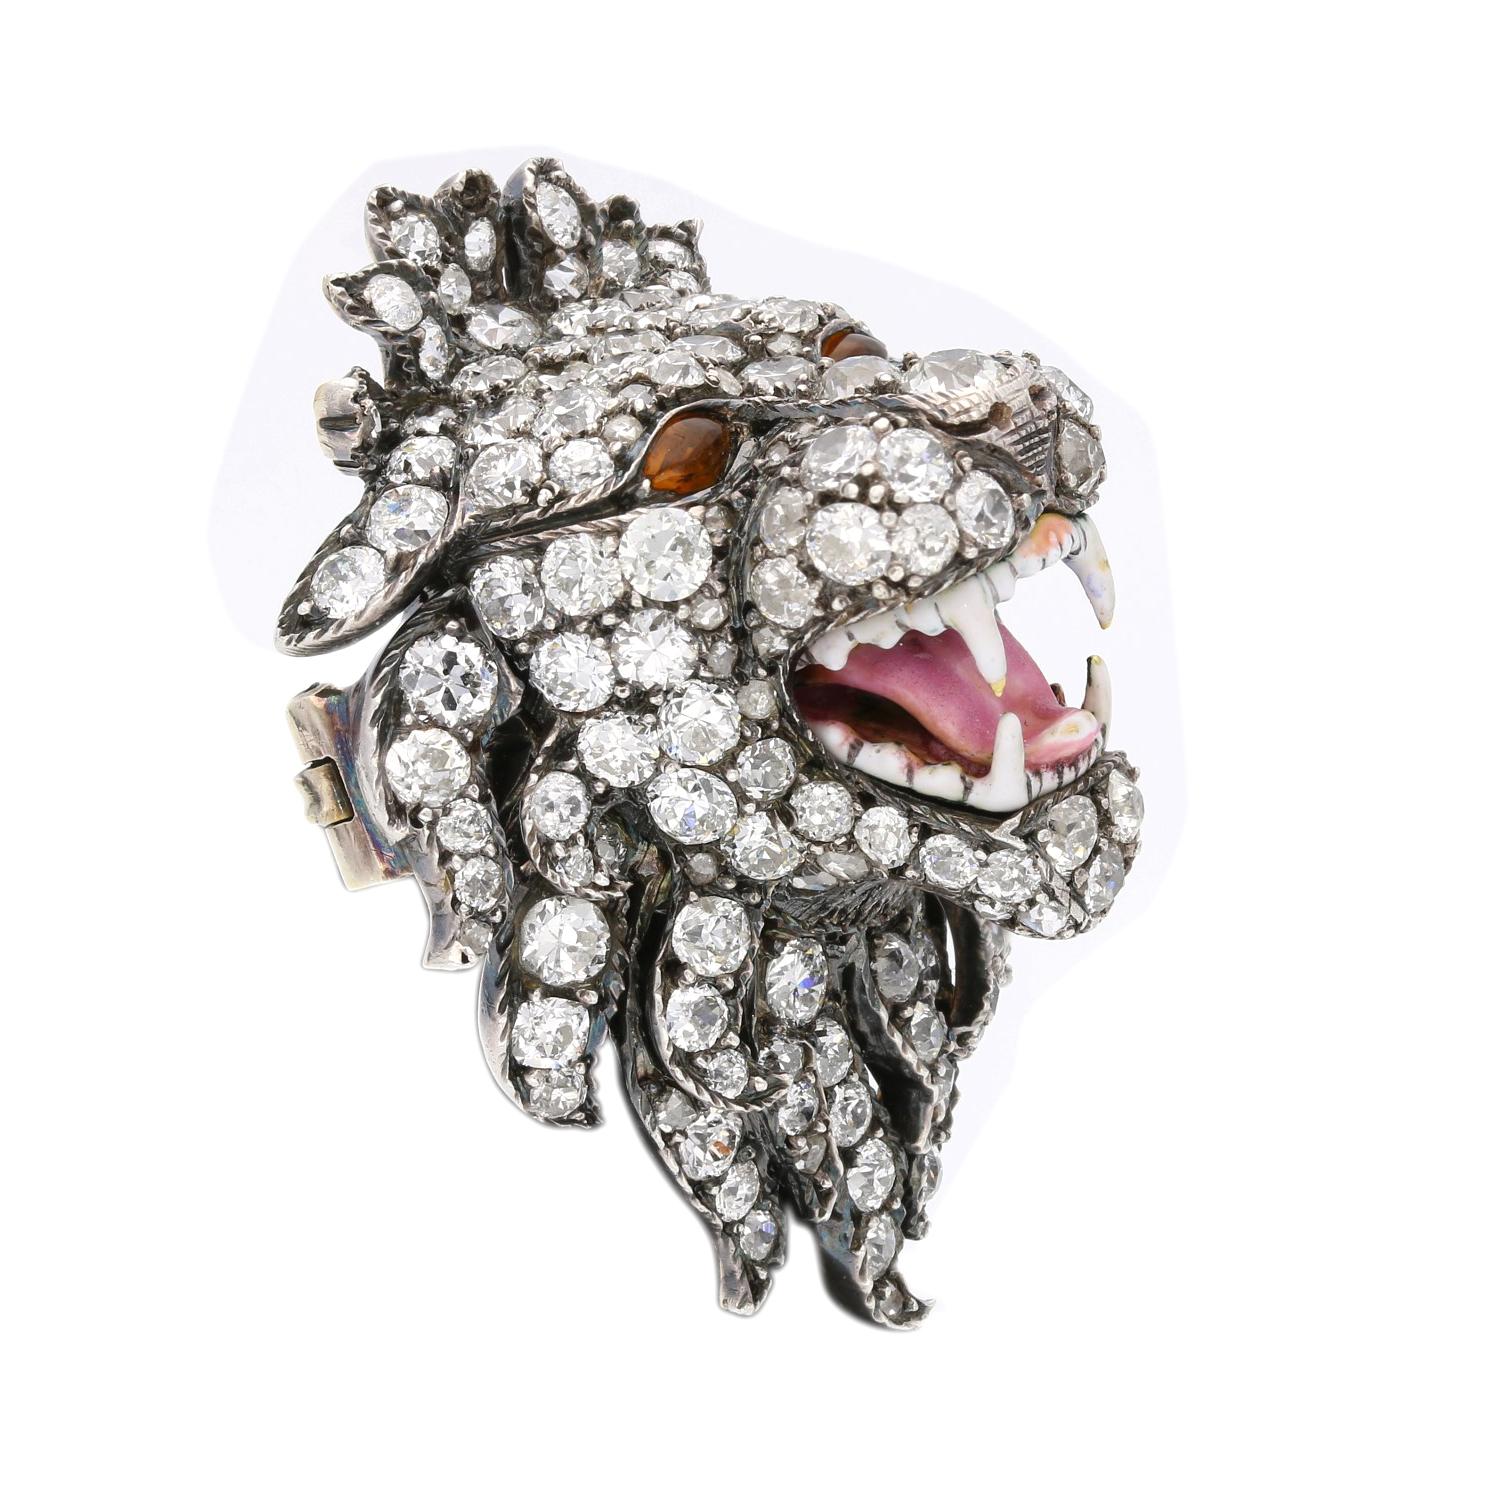 A sensational Victorian diamond and enamel brooch c.1890, modelled as a three dimensional roaring lion head with magnificent mane set throughout with old brilliant cut diamonds, with open mouth baring white enamel teeth and pink enamel tongue and